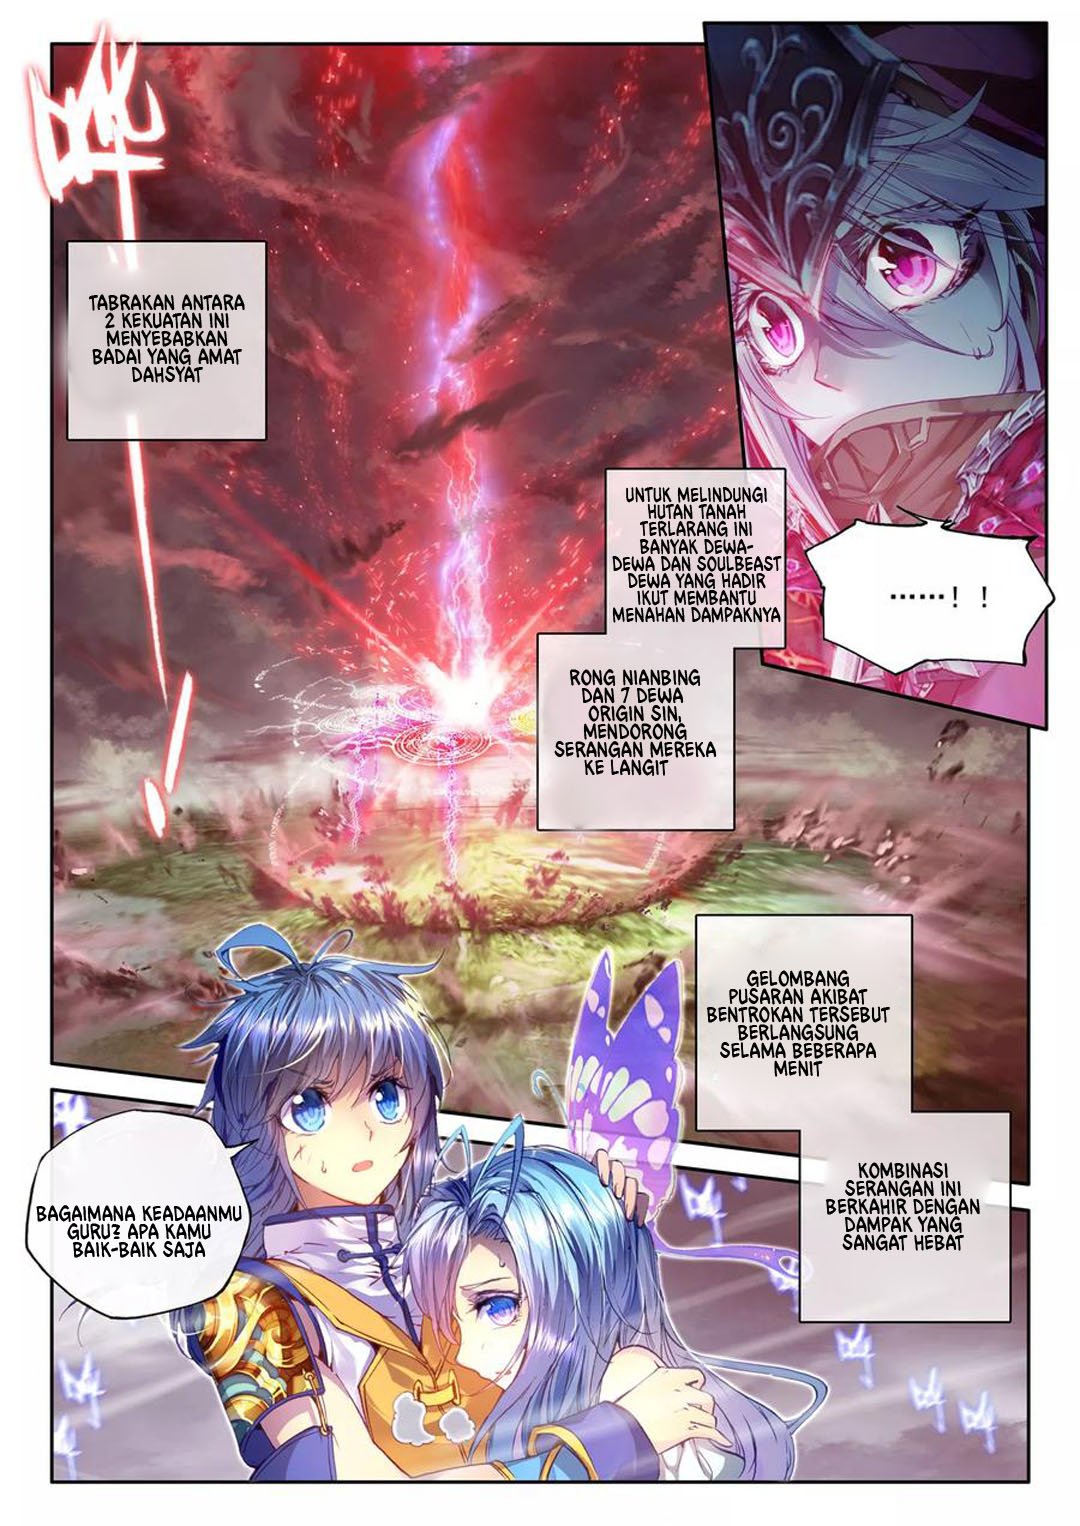 Soul Land – Legend of The Gods’ Realm Chapter 41.2